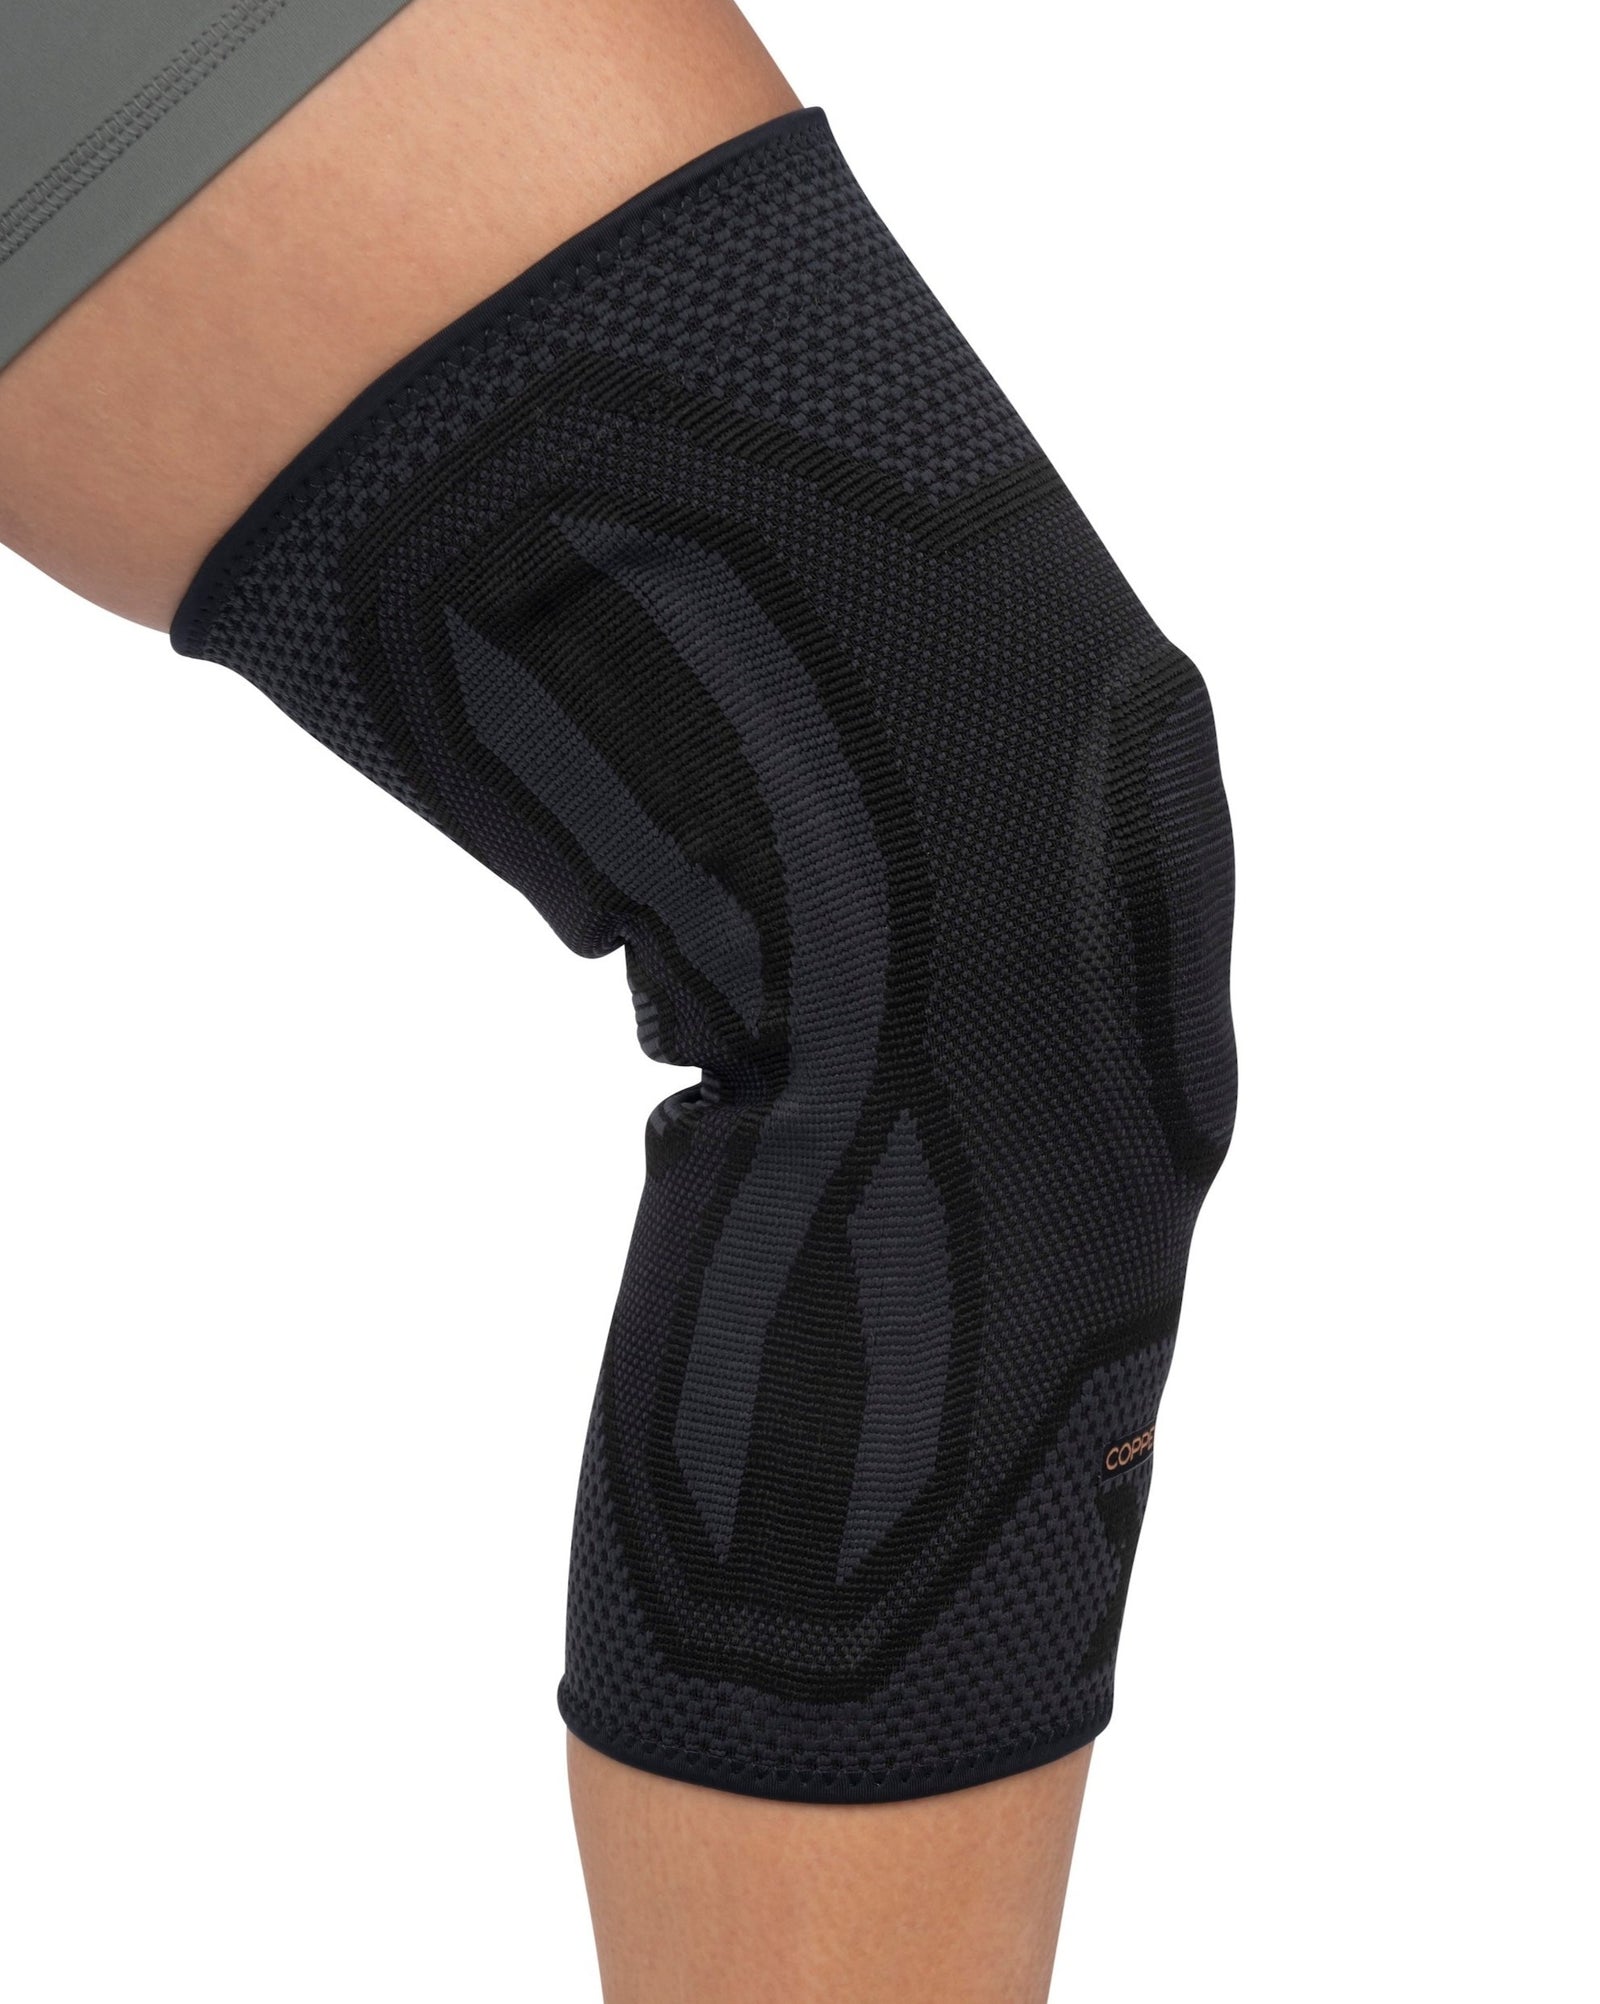 Idea Village Copper Fit Knee Supports with Hot / Cold Therapy